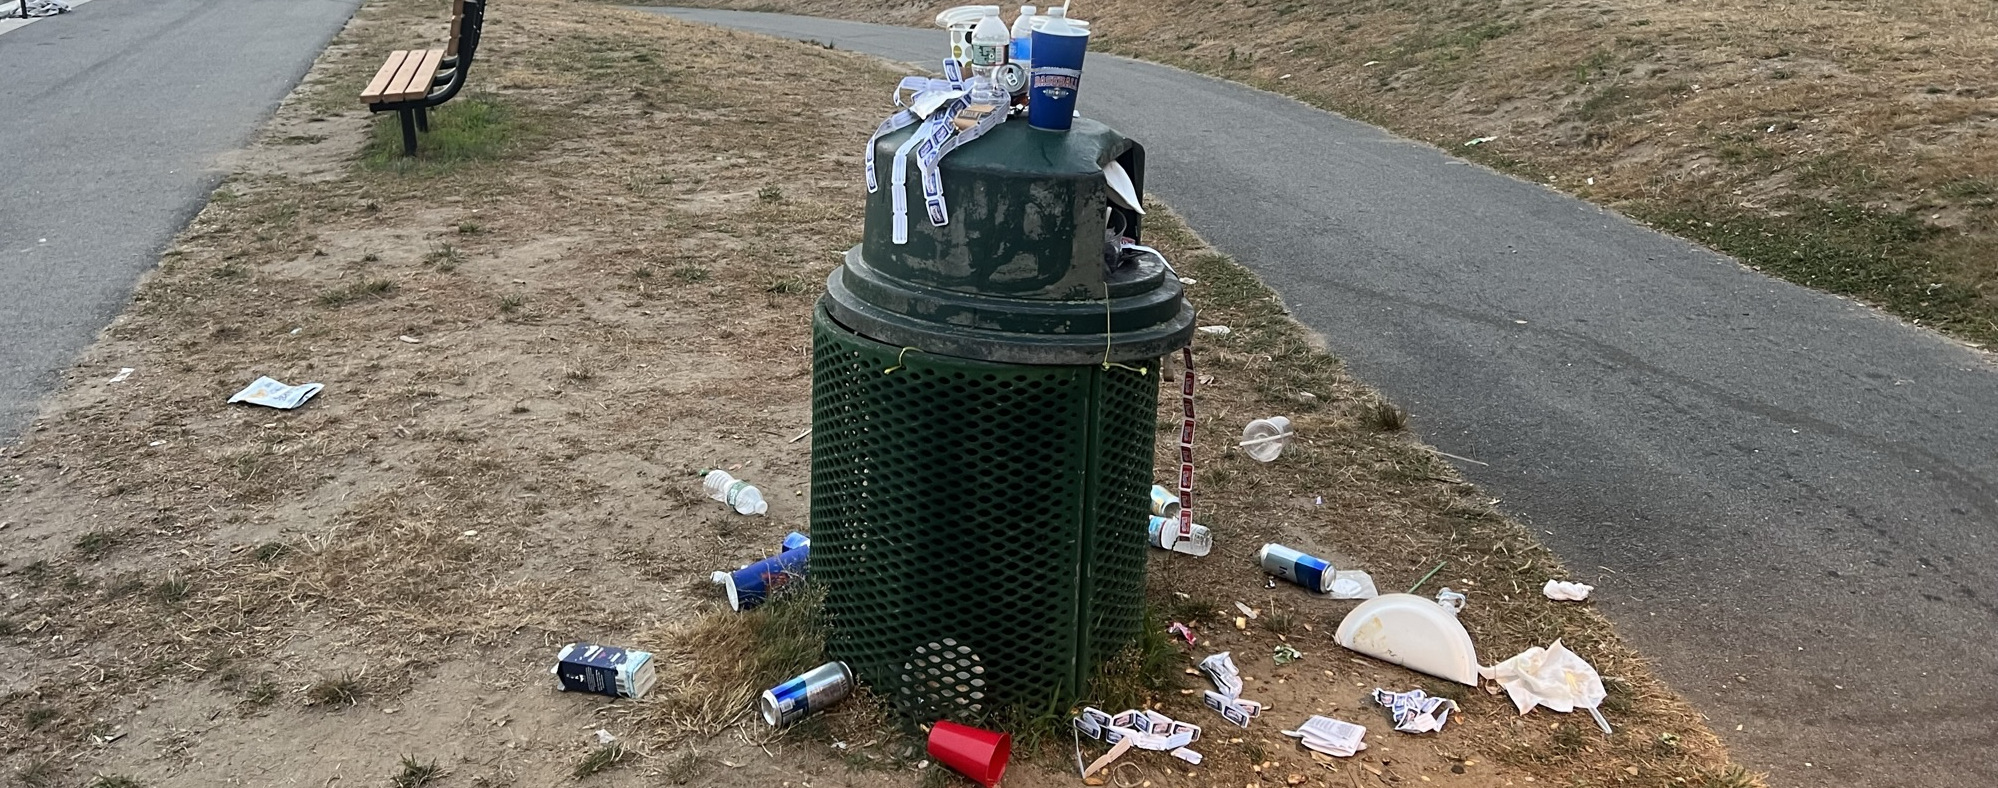 Overflowing trash can after baseball game on Cape Cod